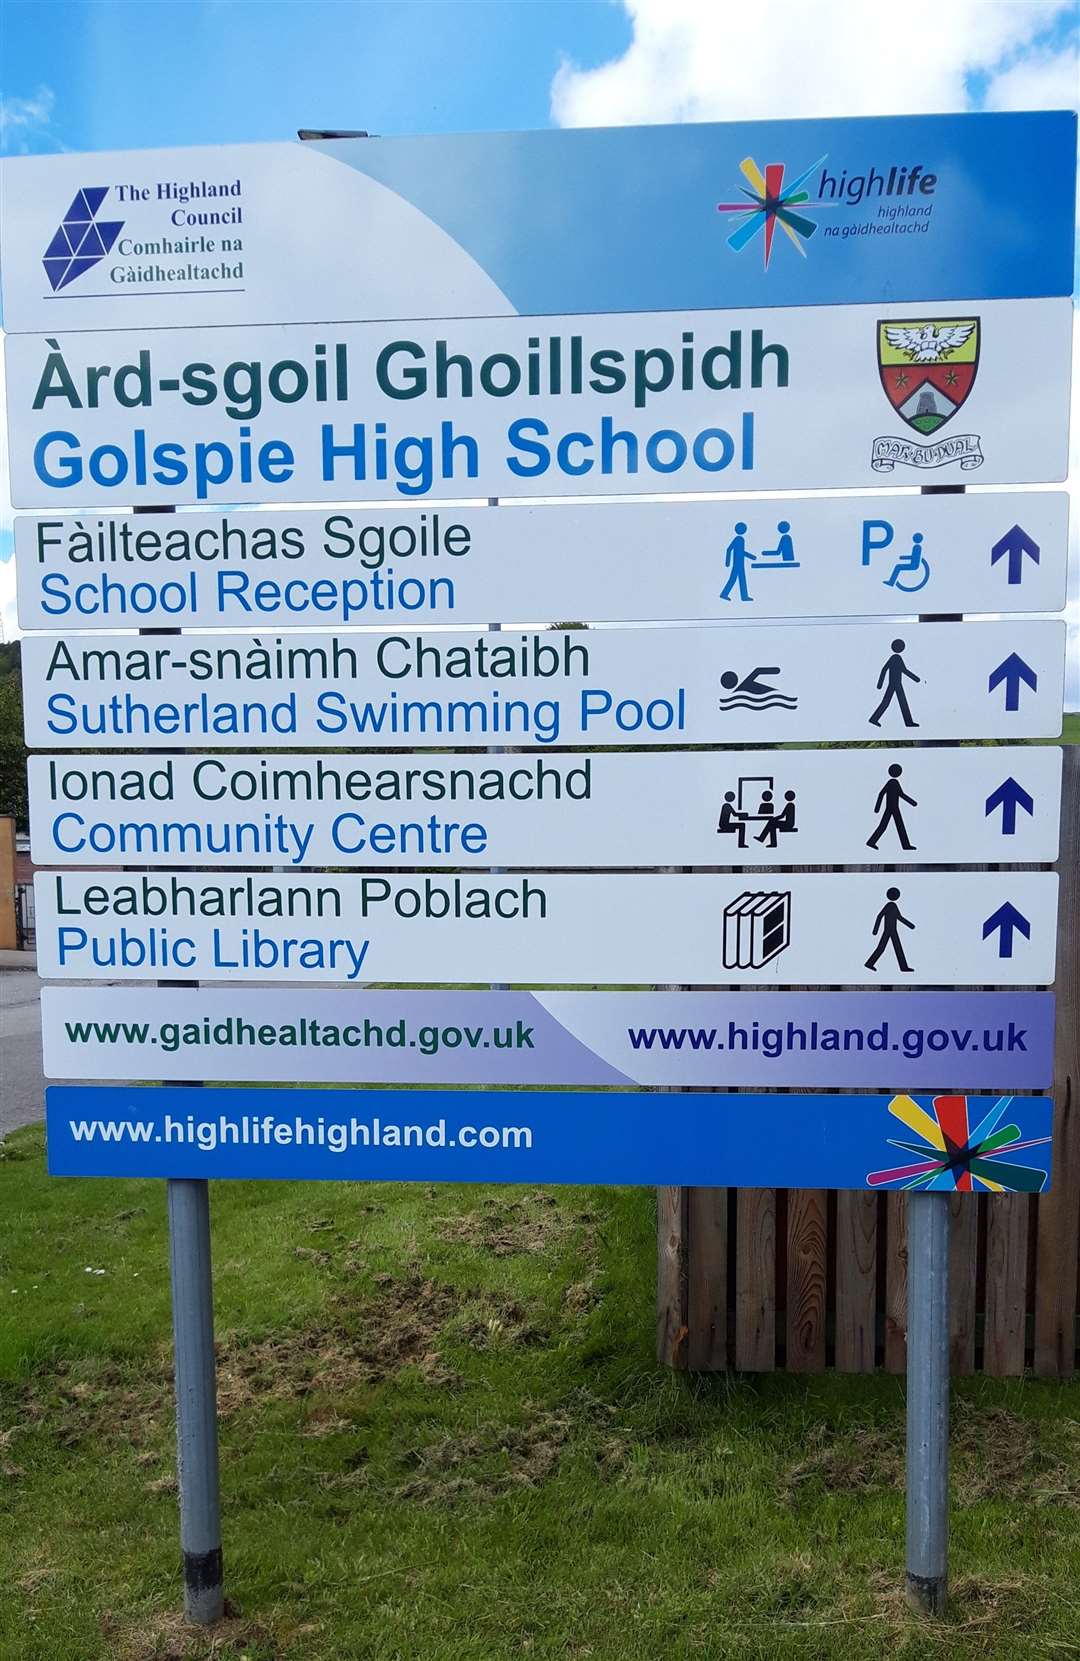 Golspie High School has been monitored closely since concern arose over its academic performance.